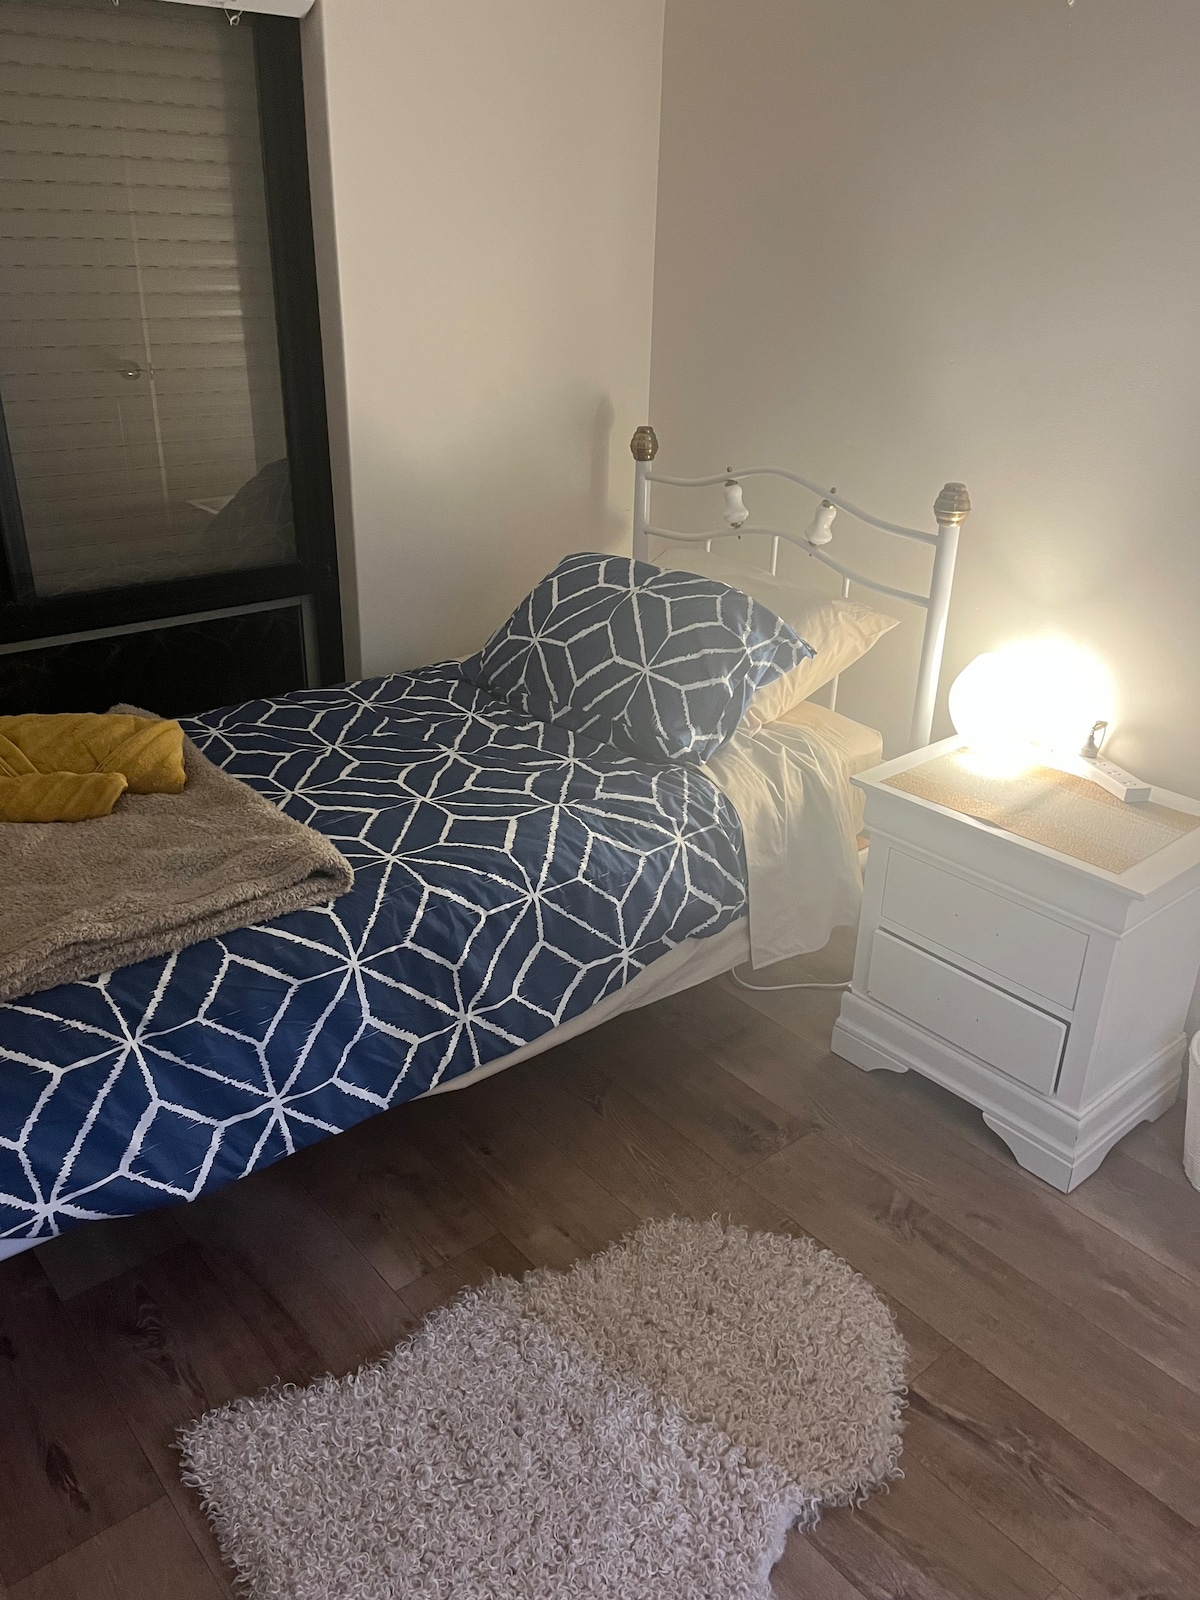 Private room in nice shared house - female only